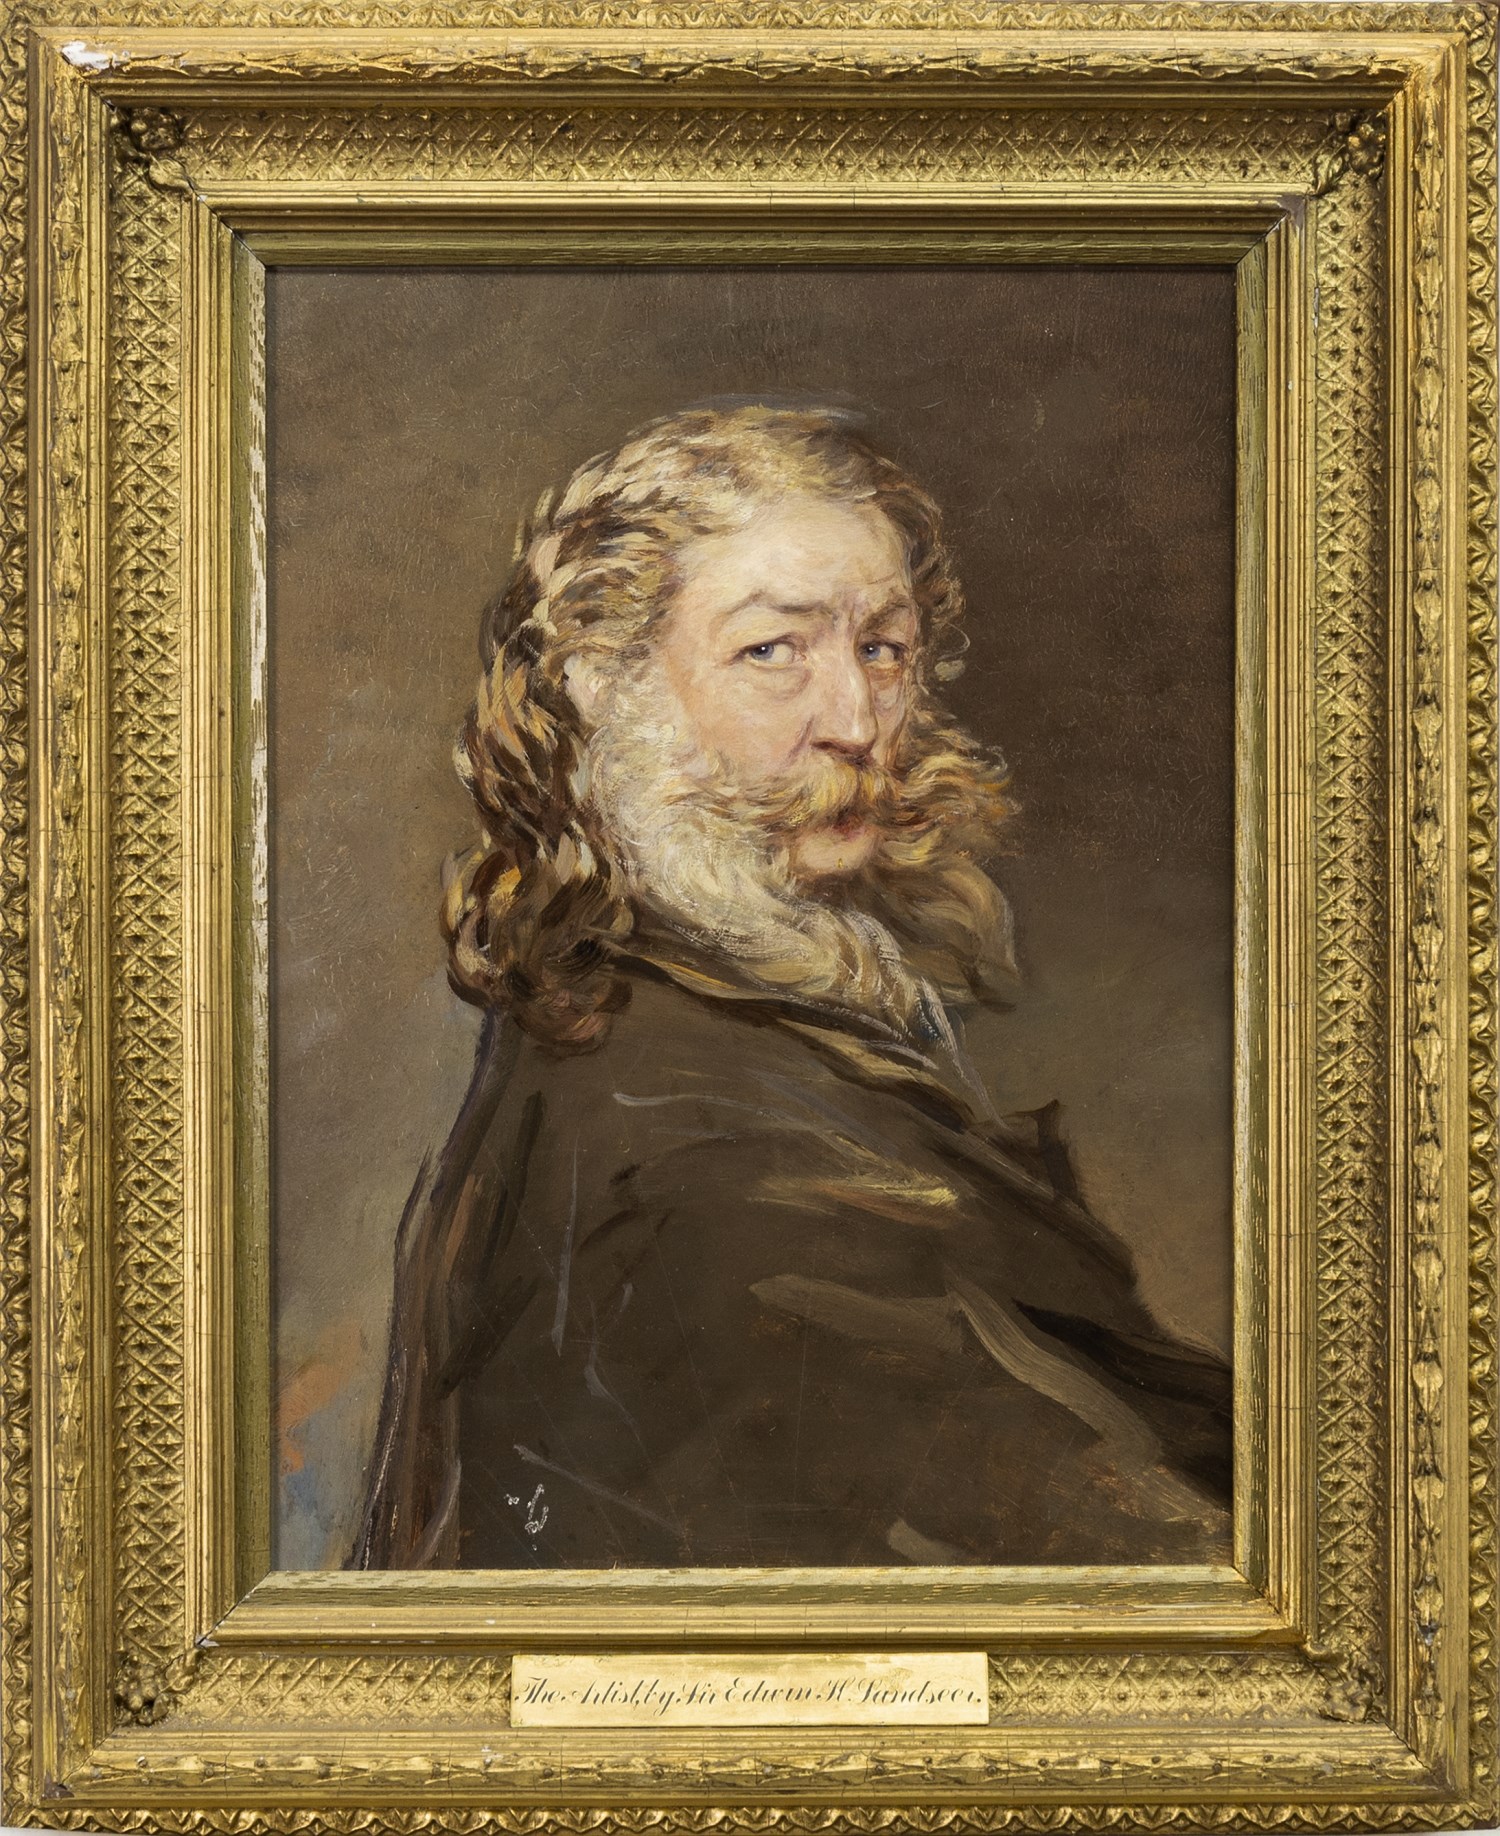 PORTRAIT OF SIR EDWIN HENRY LANDSEER, ATTRIBUTED TO THE ARTIST